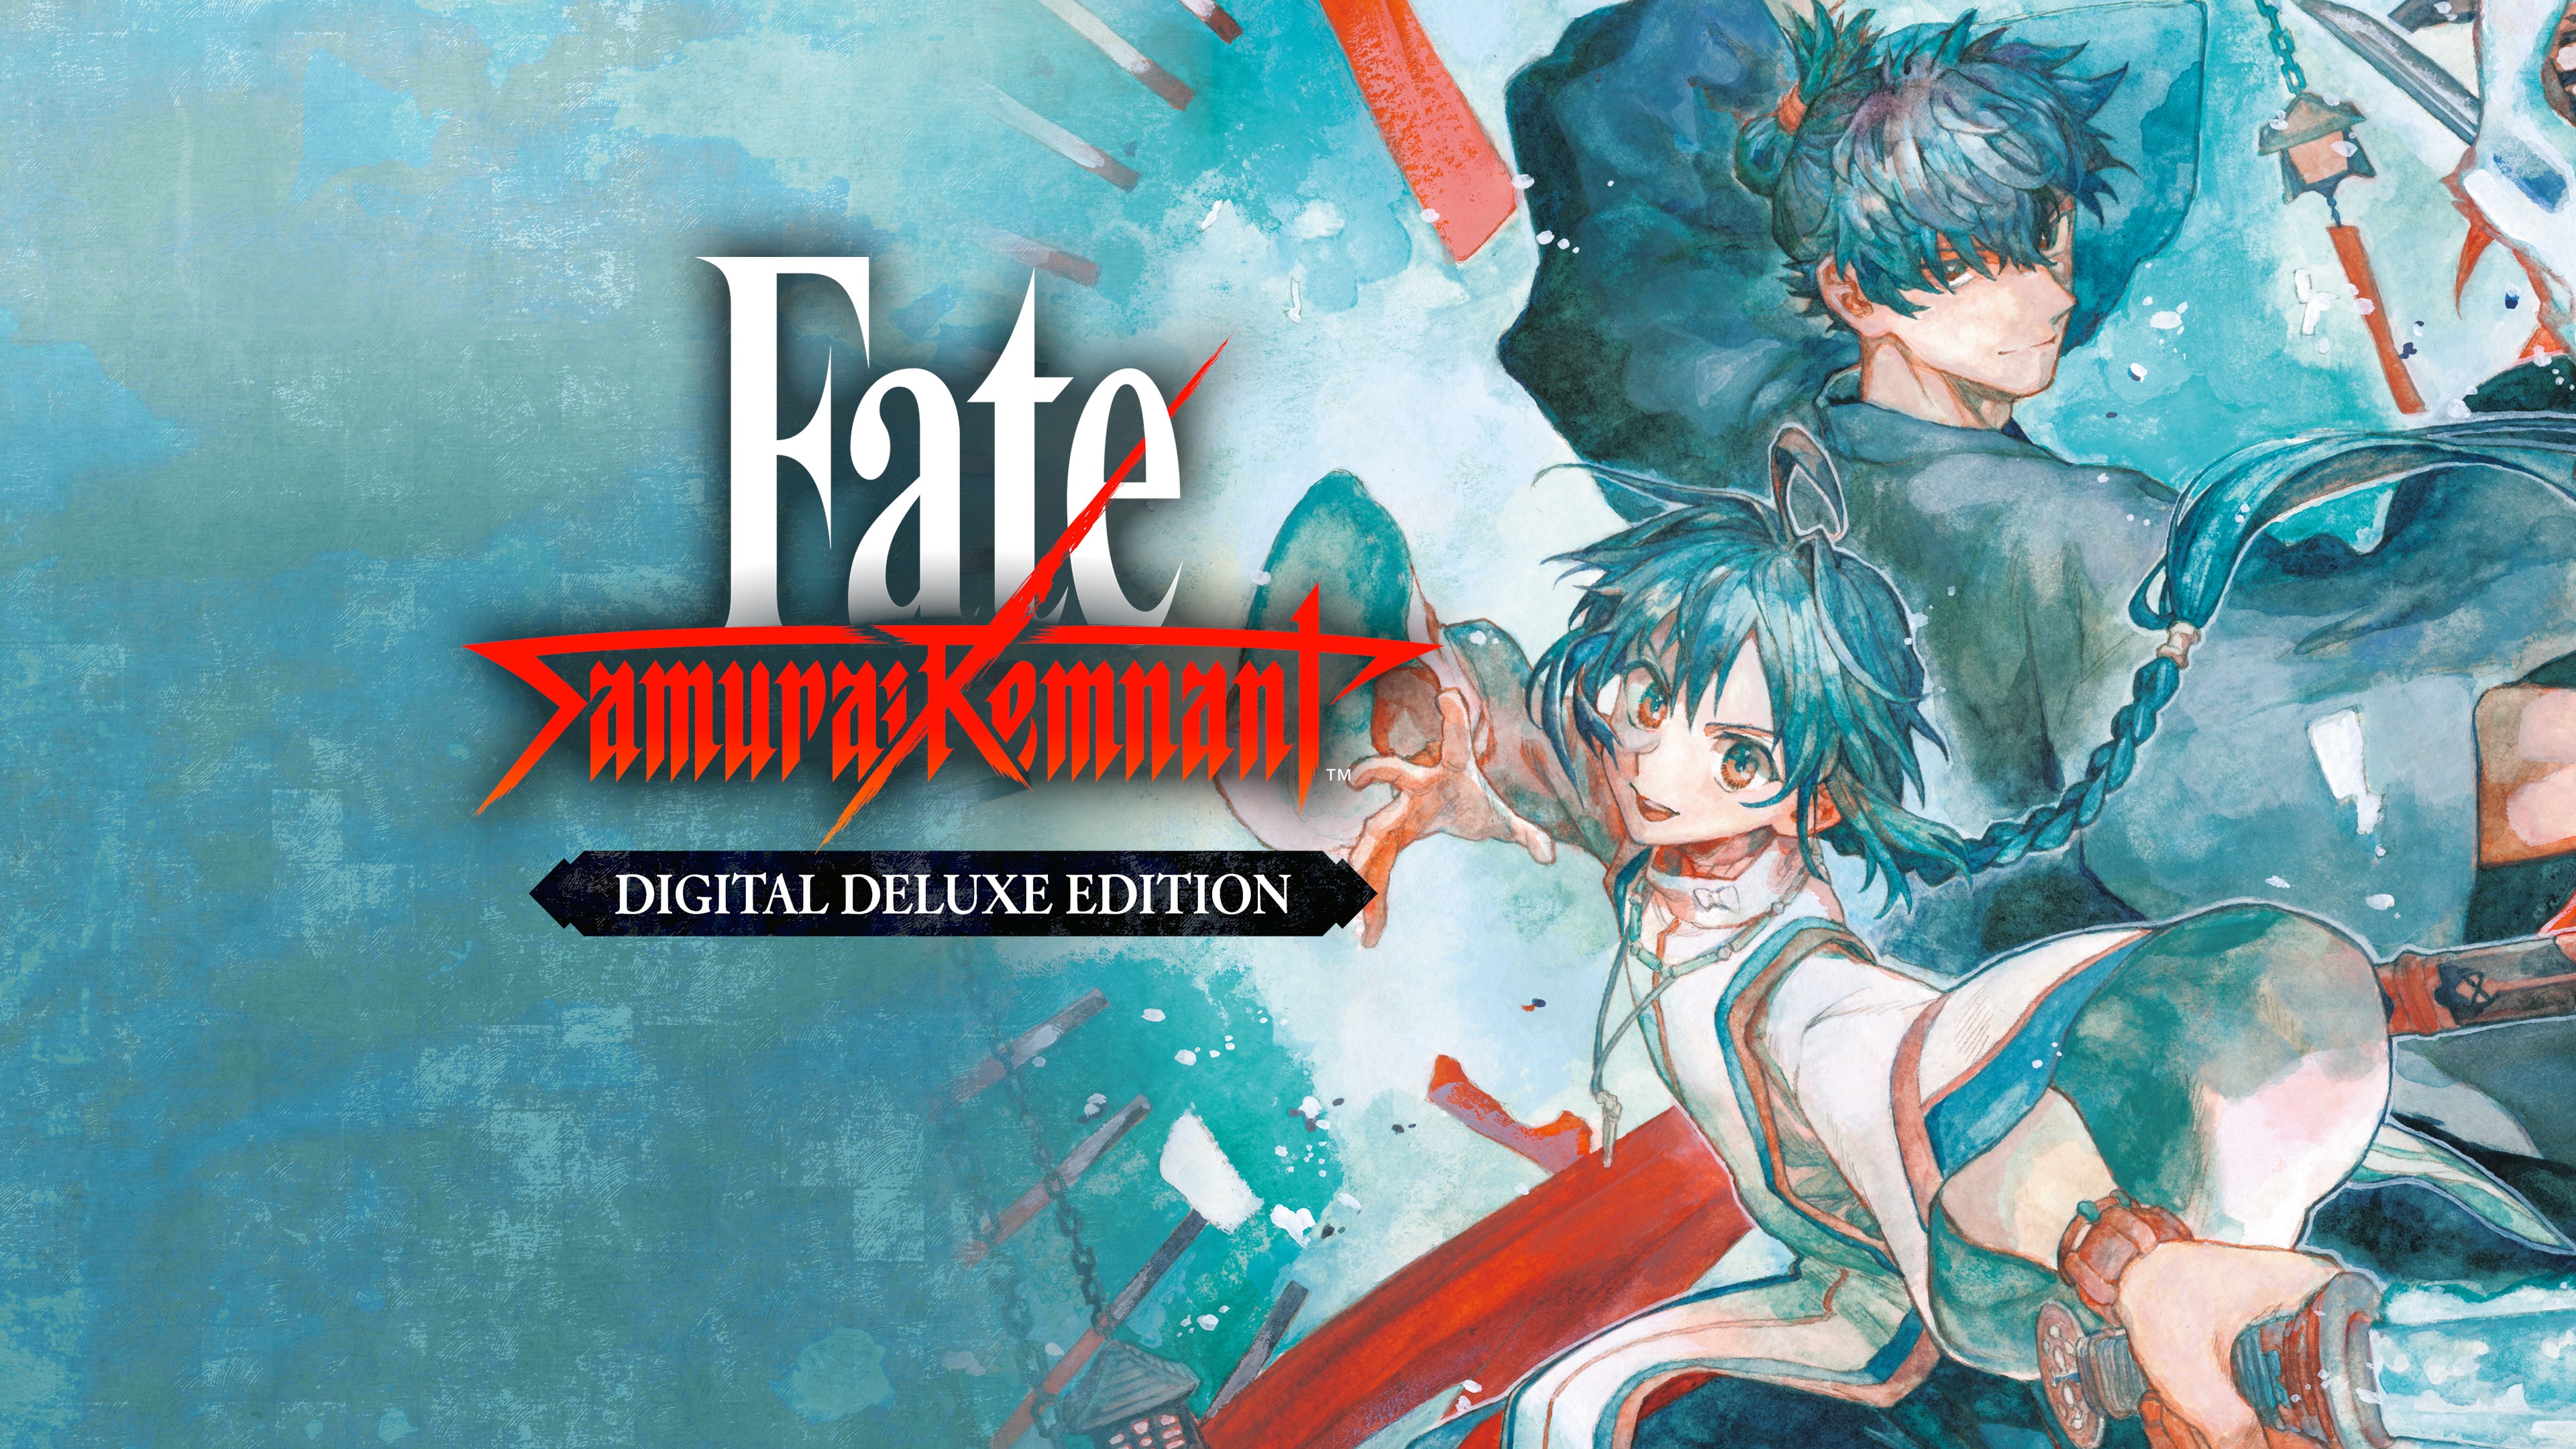 Fate/Samurai Remnant Digital Deluxe Edition for Nintendo Switch